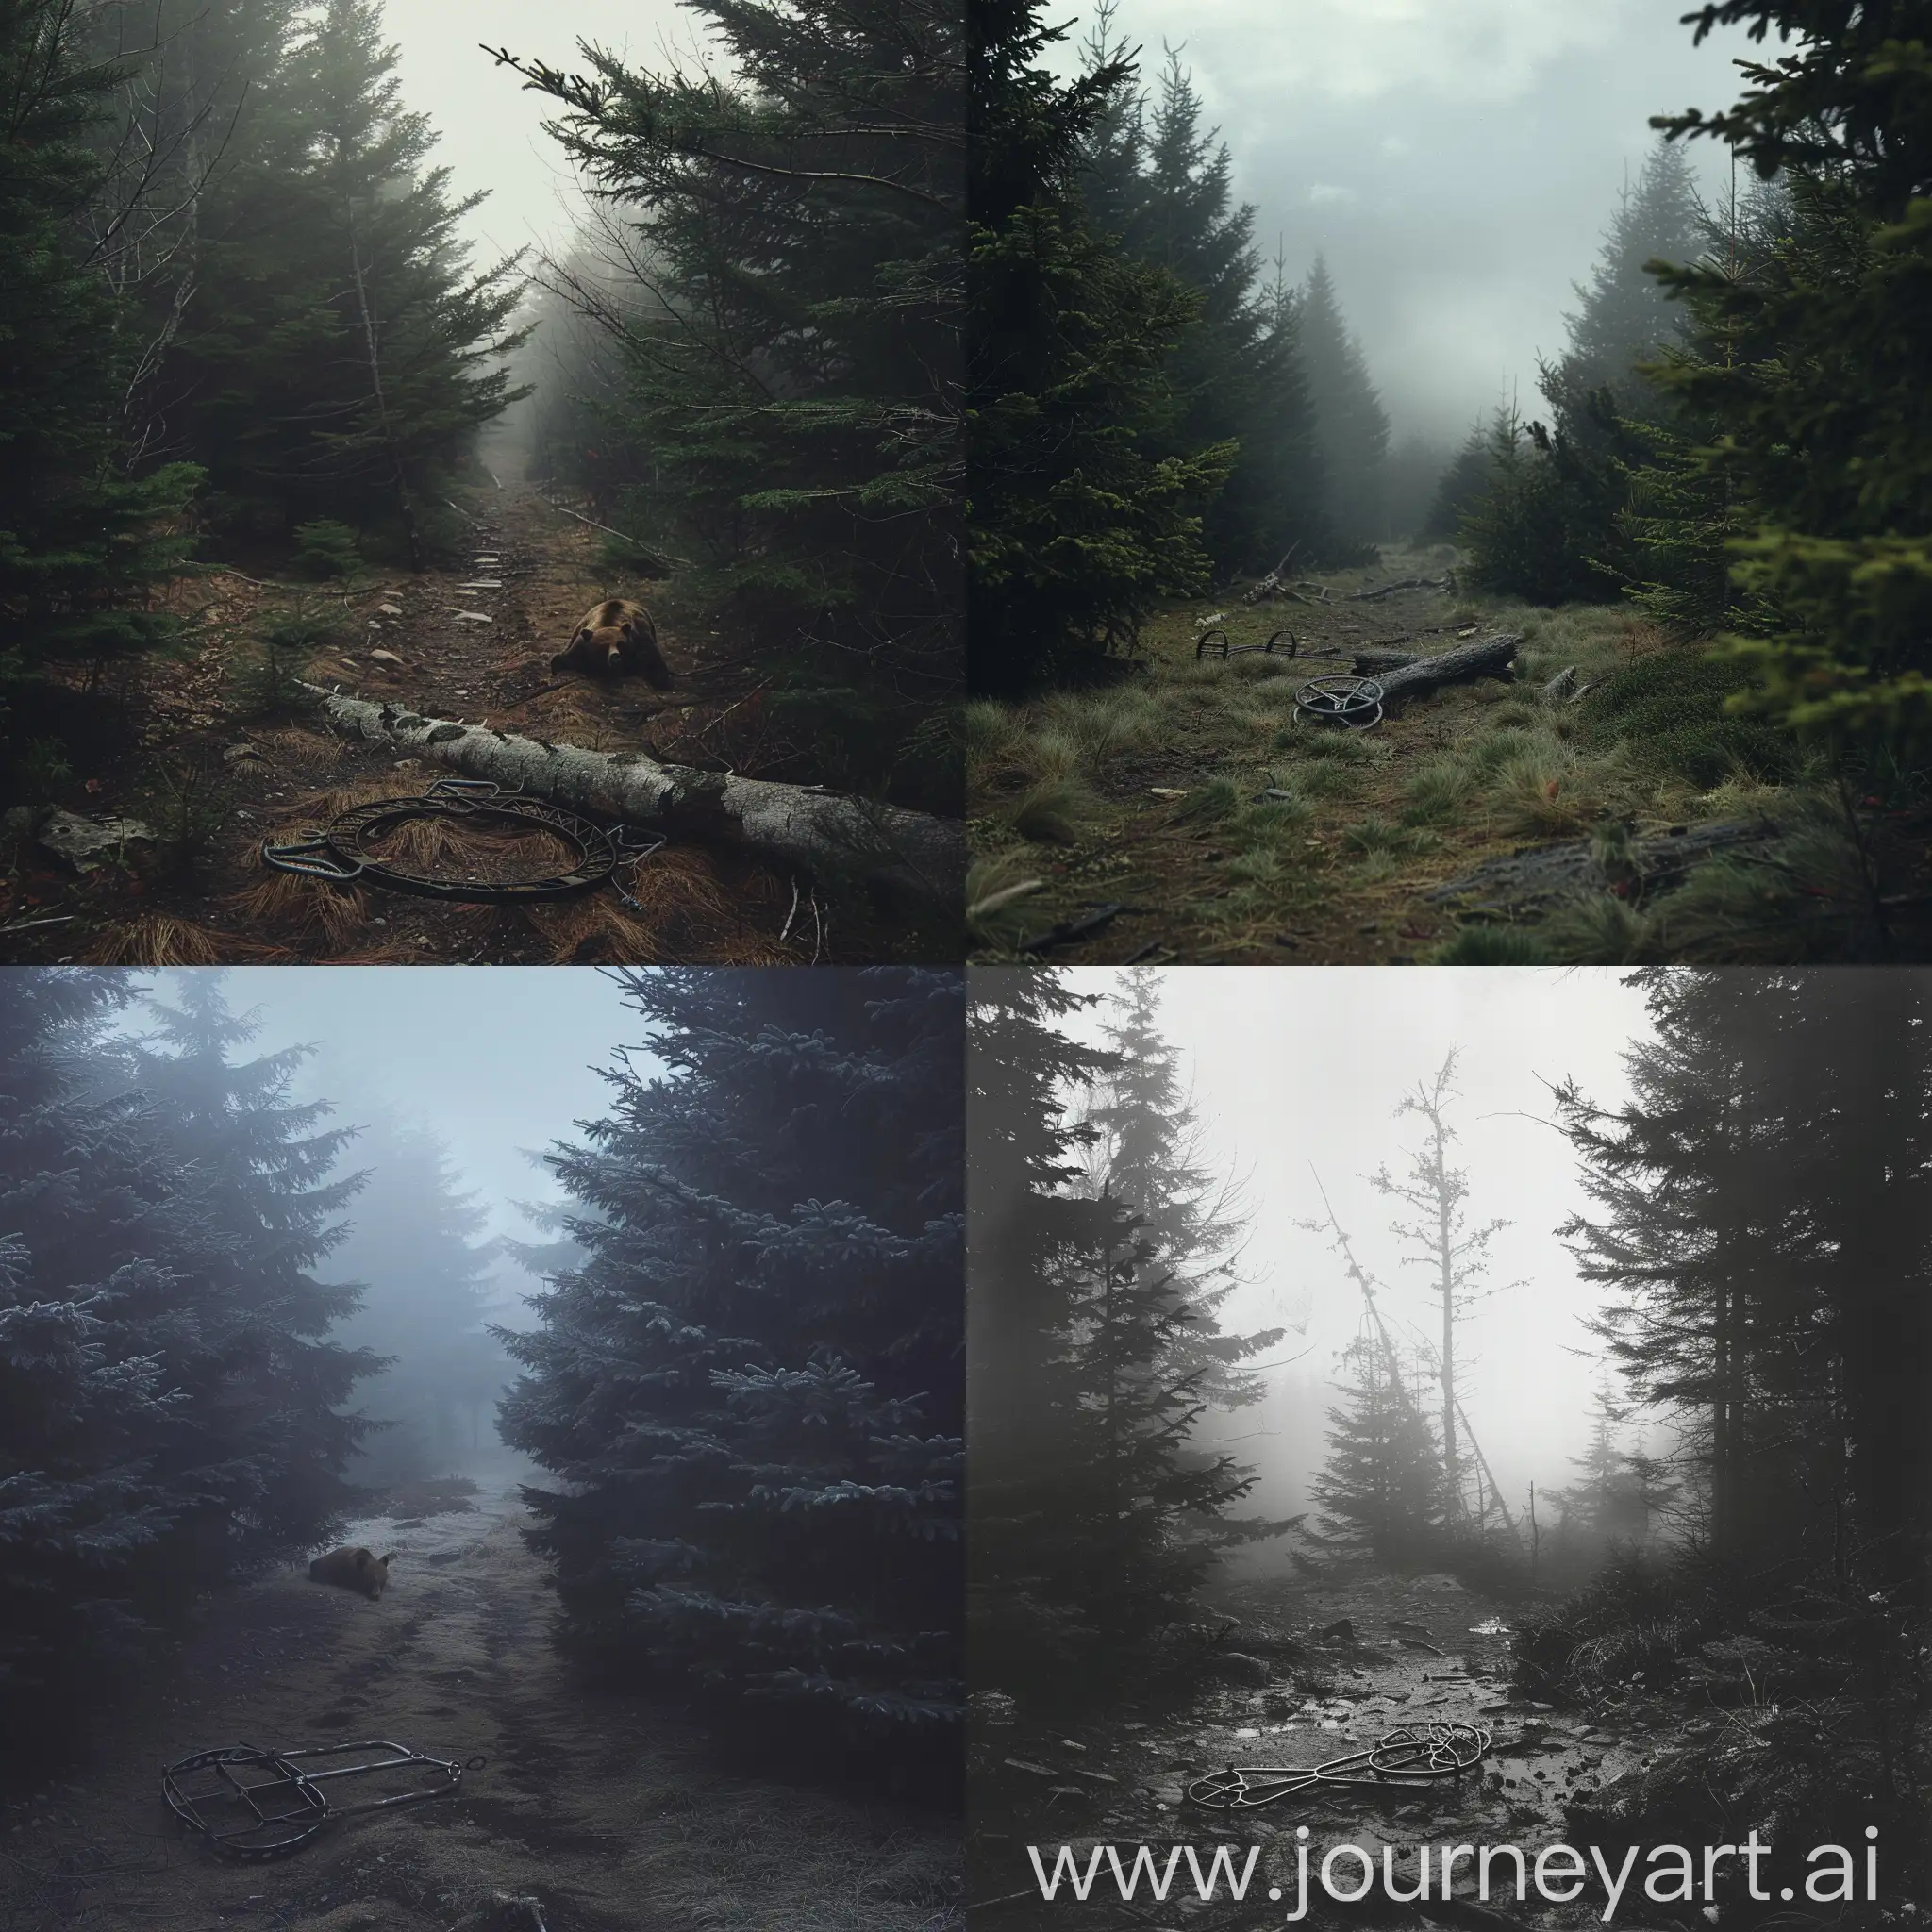 Eerie-Forest-Scene-with-Bear-Trap-in-Thick-Fog